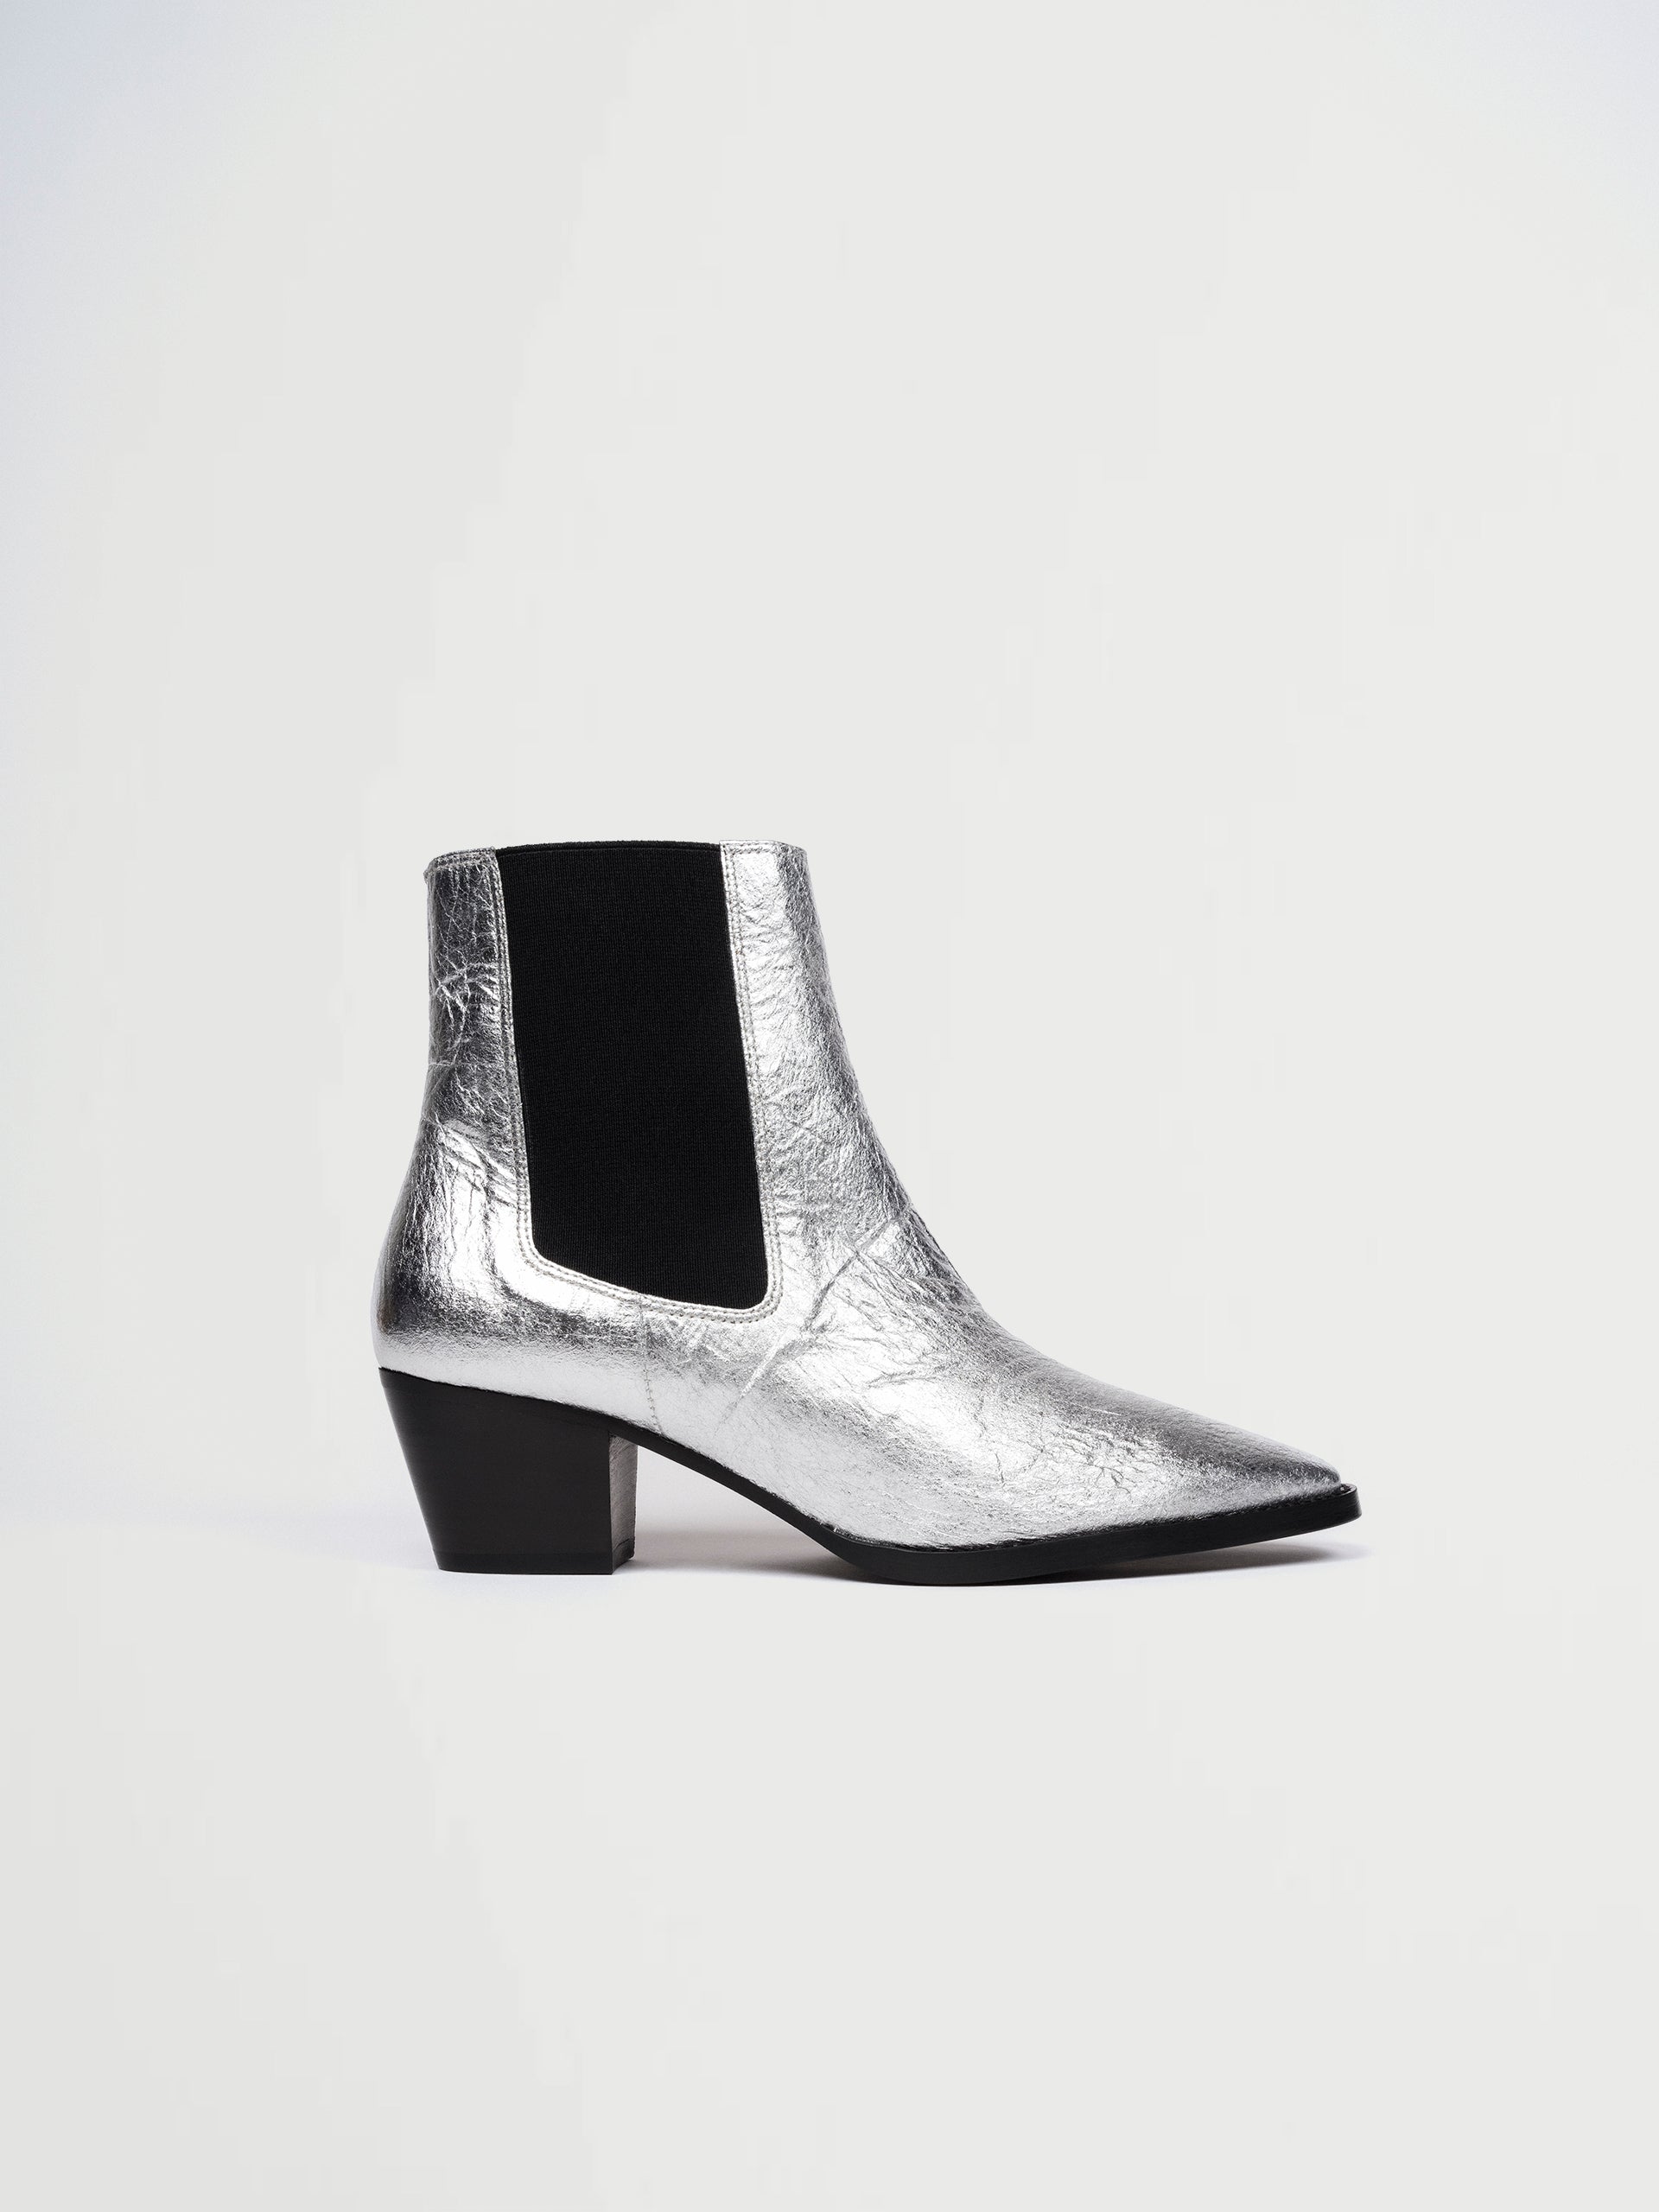 Silver vegan leather boots